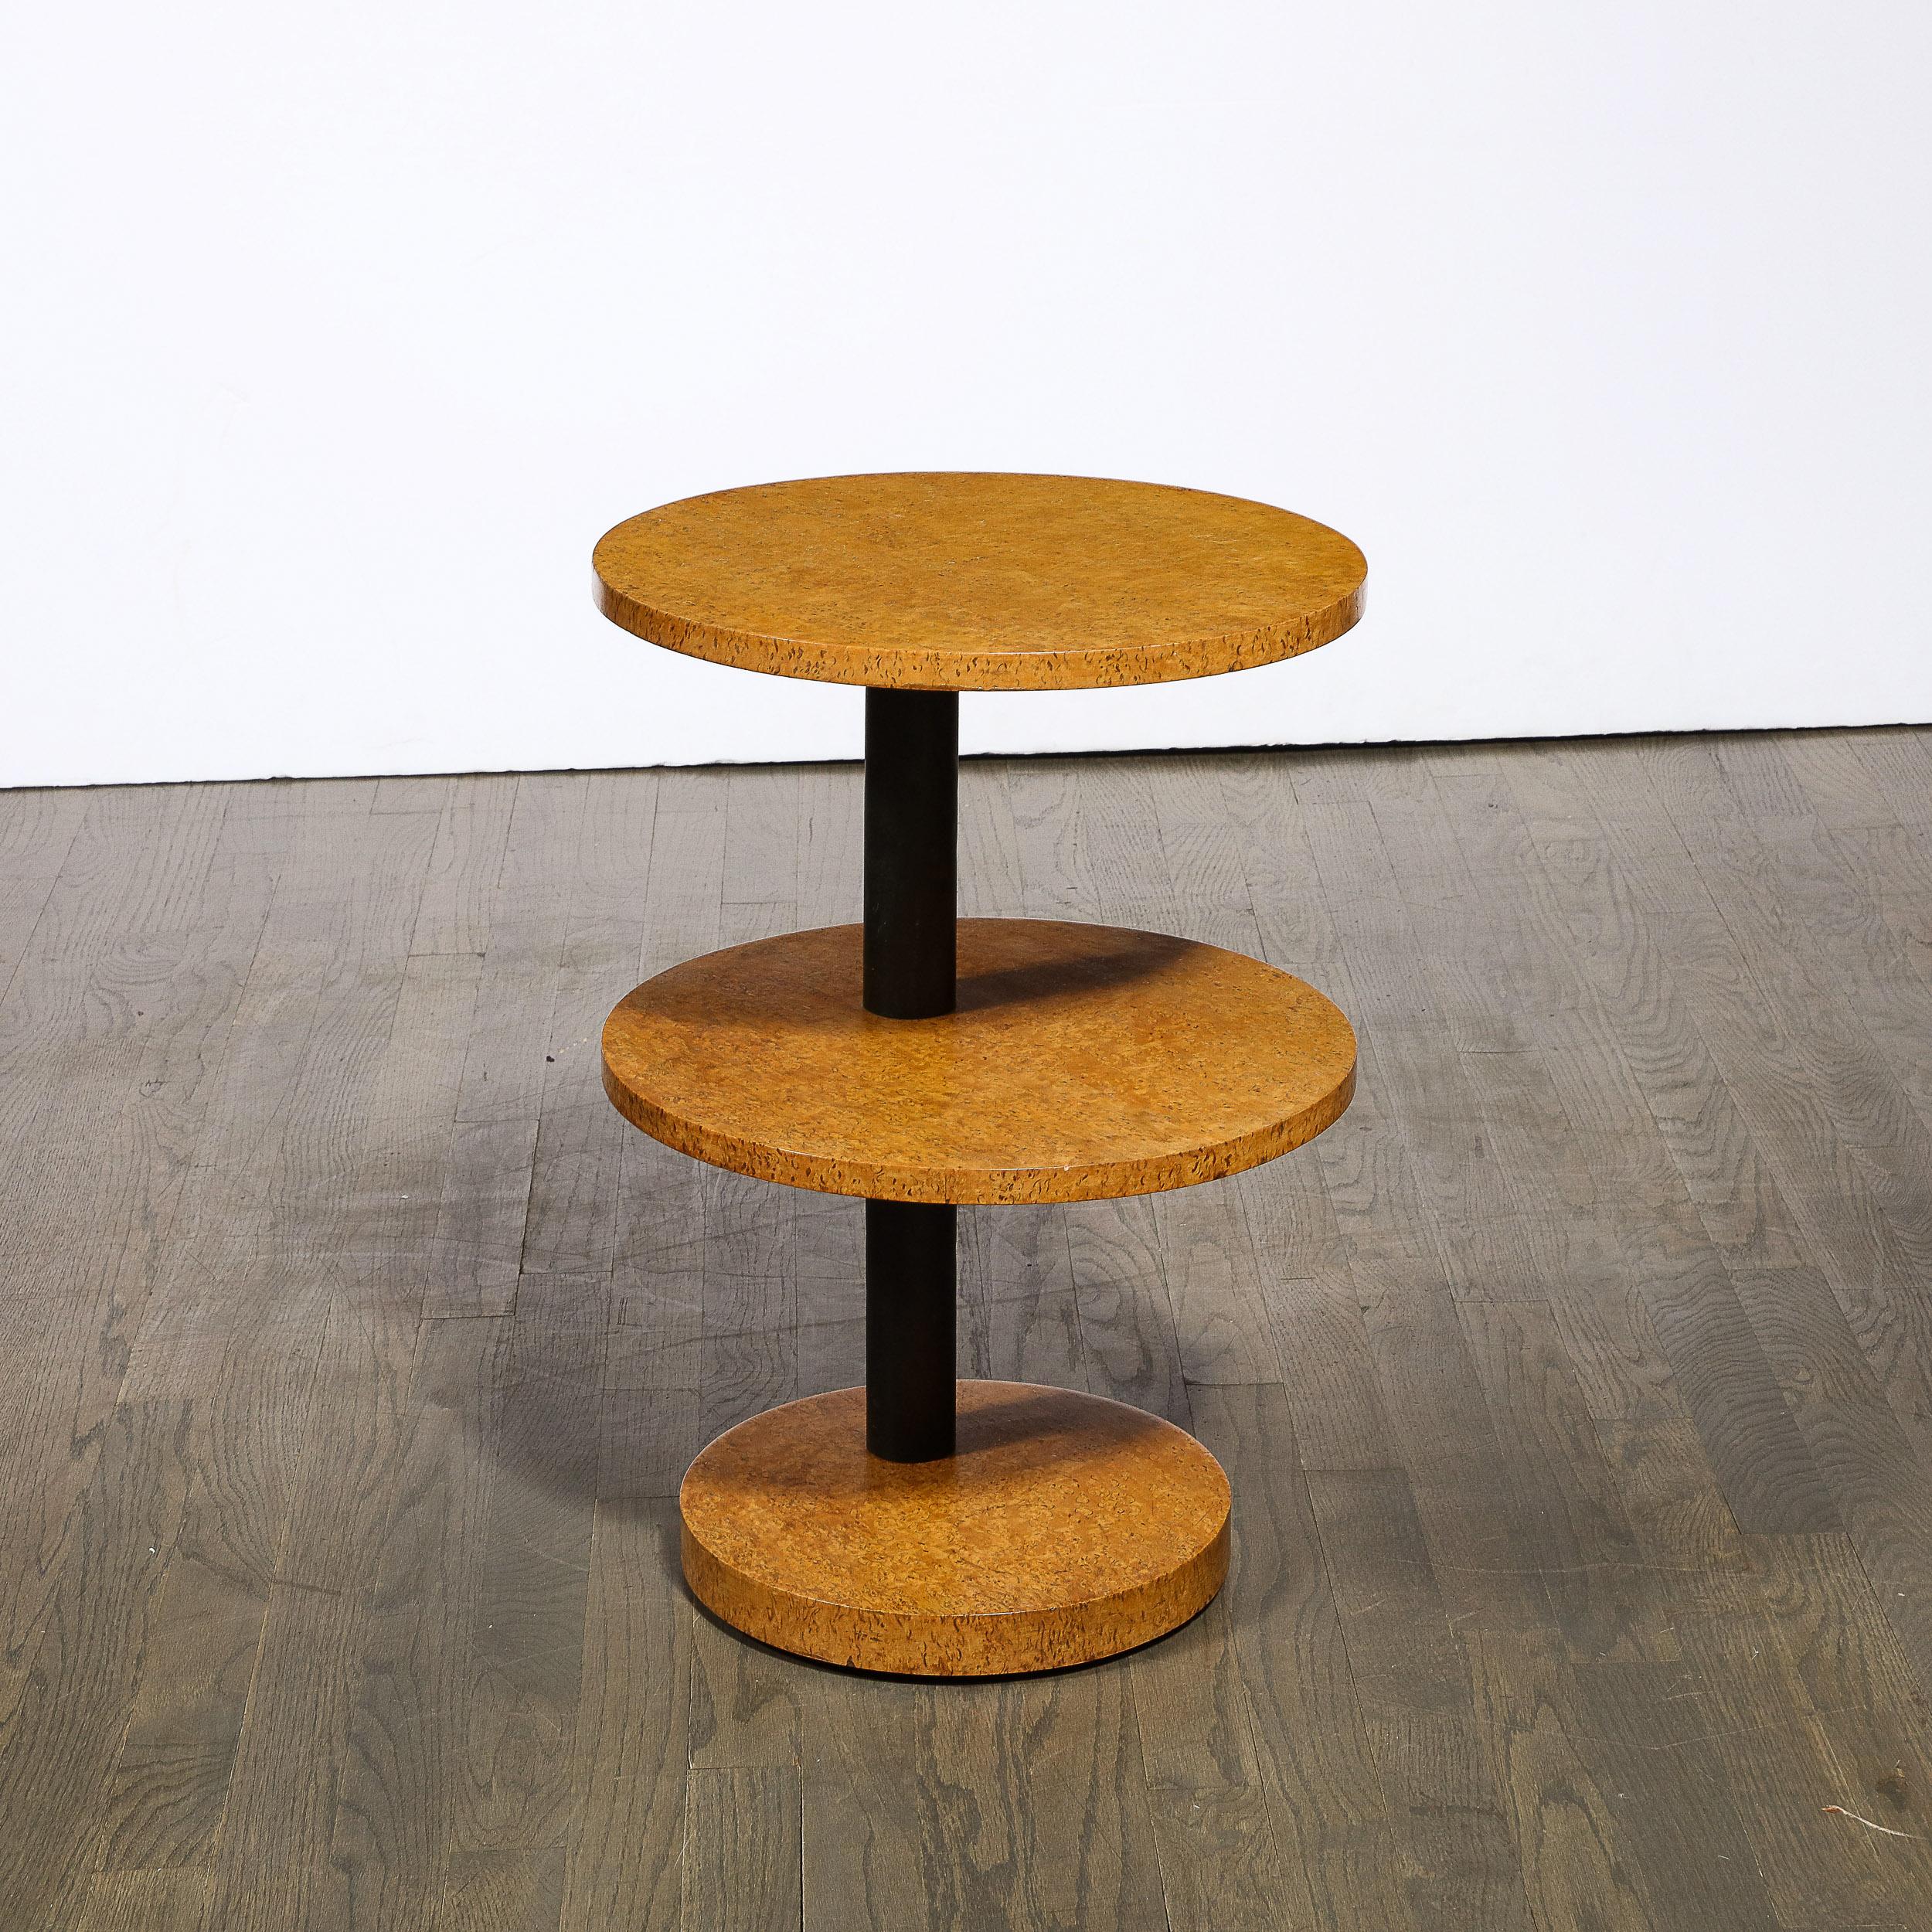 This stunning Art Deco Machine age three tier side/ end table was realized in the United States circa 1935. It features three circular volumetric tops in a beautiful burled elm (presenting a stunning natural blonde wood grain) pierced through by a